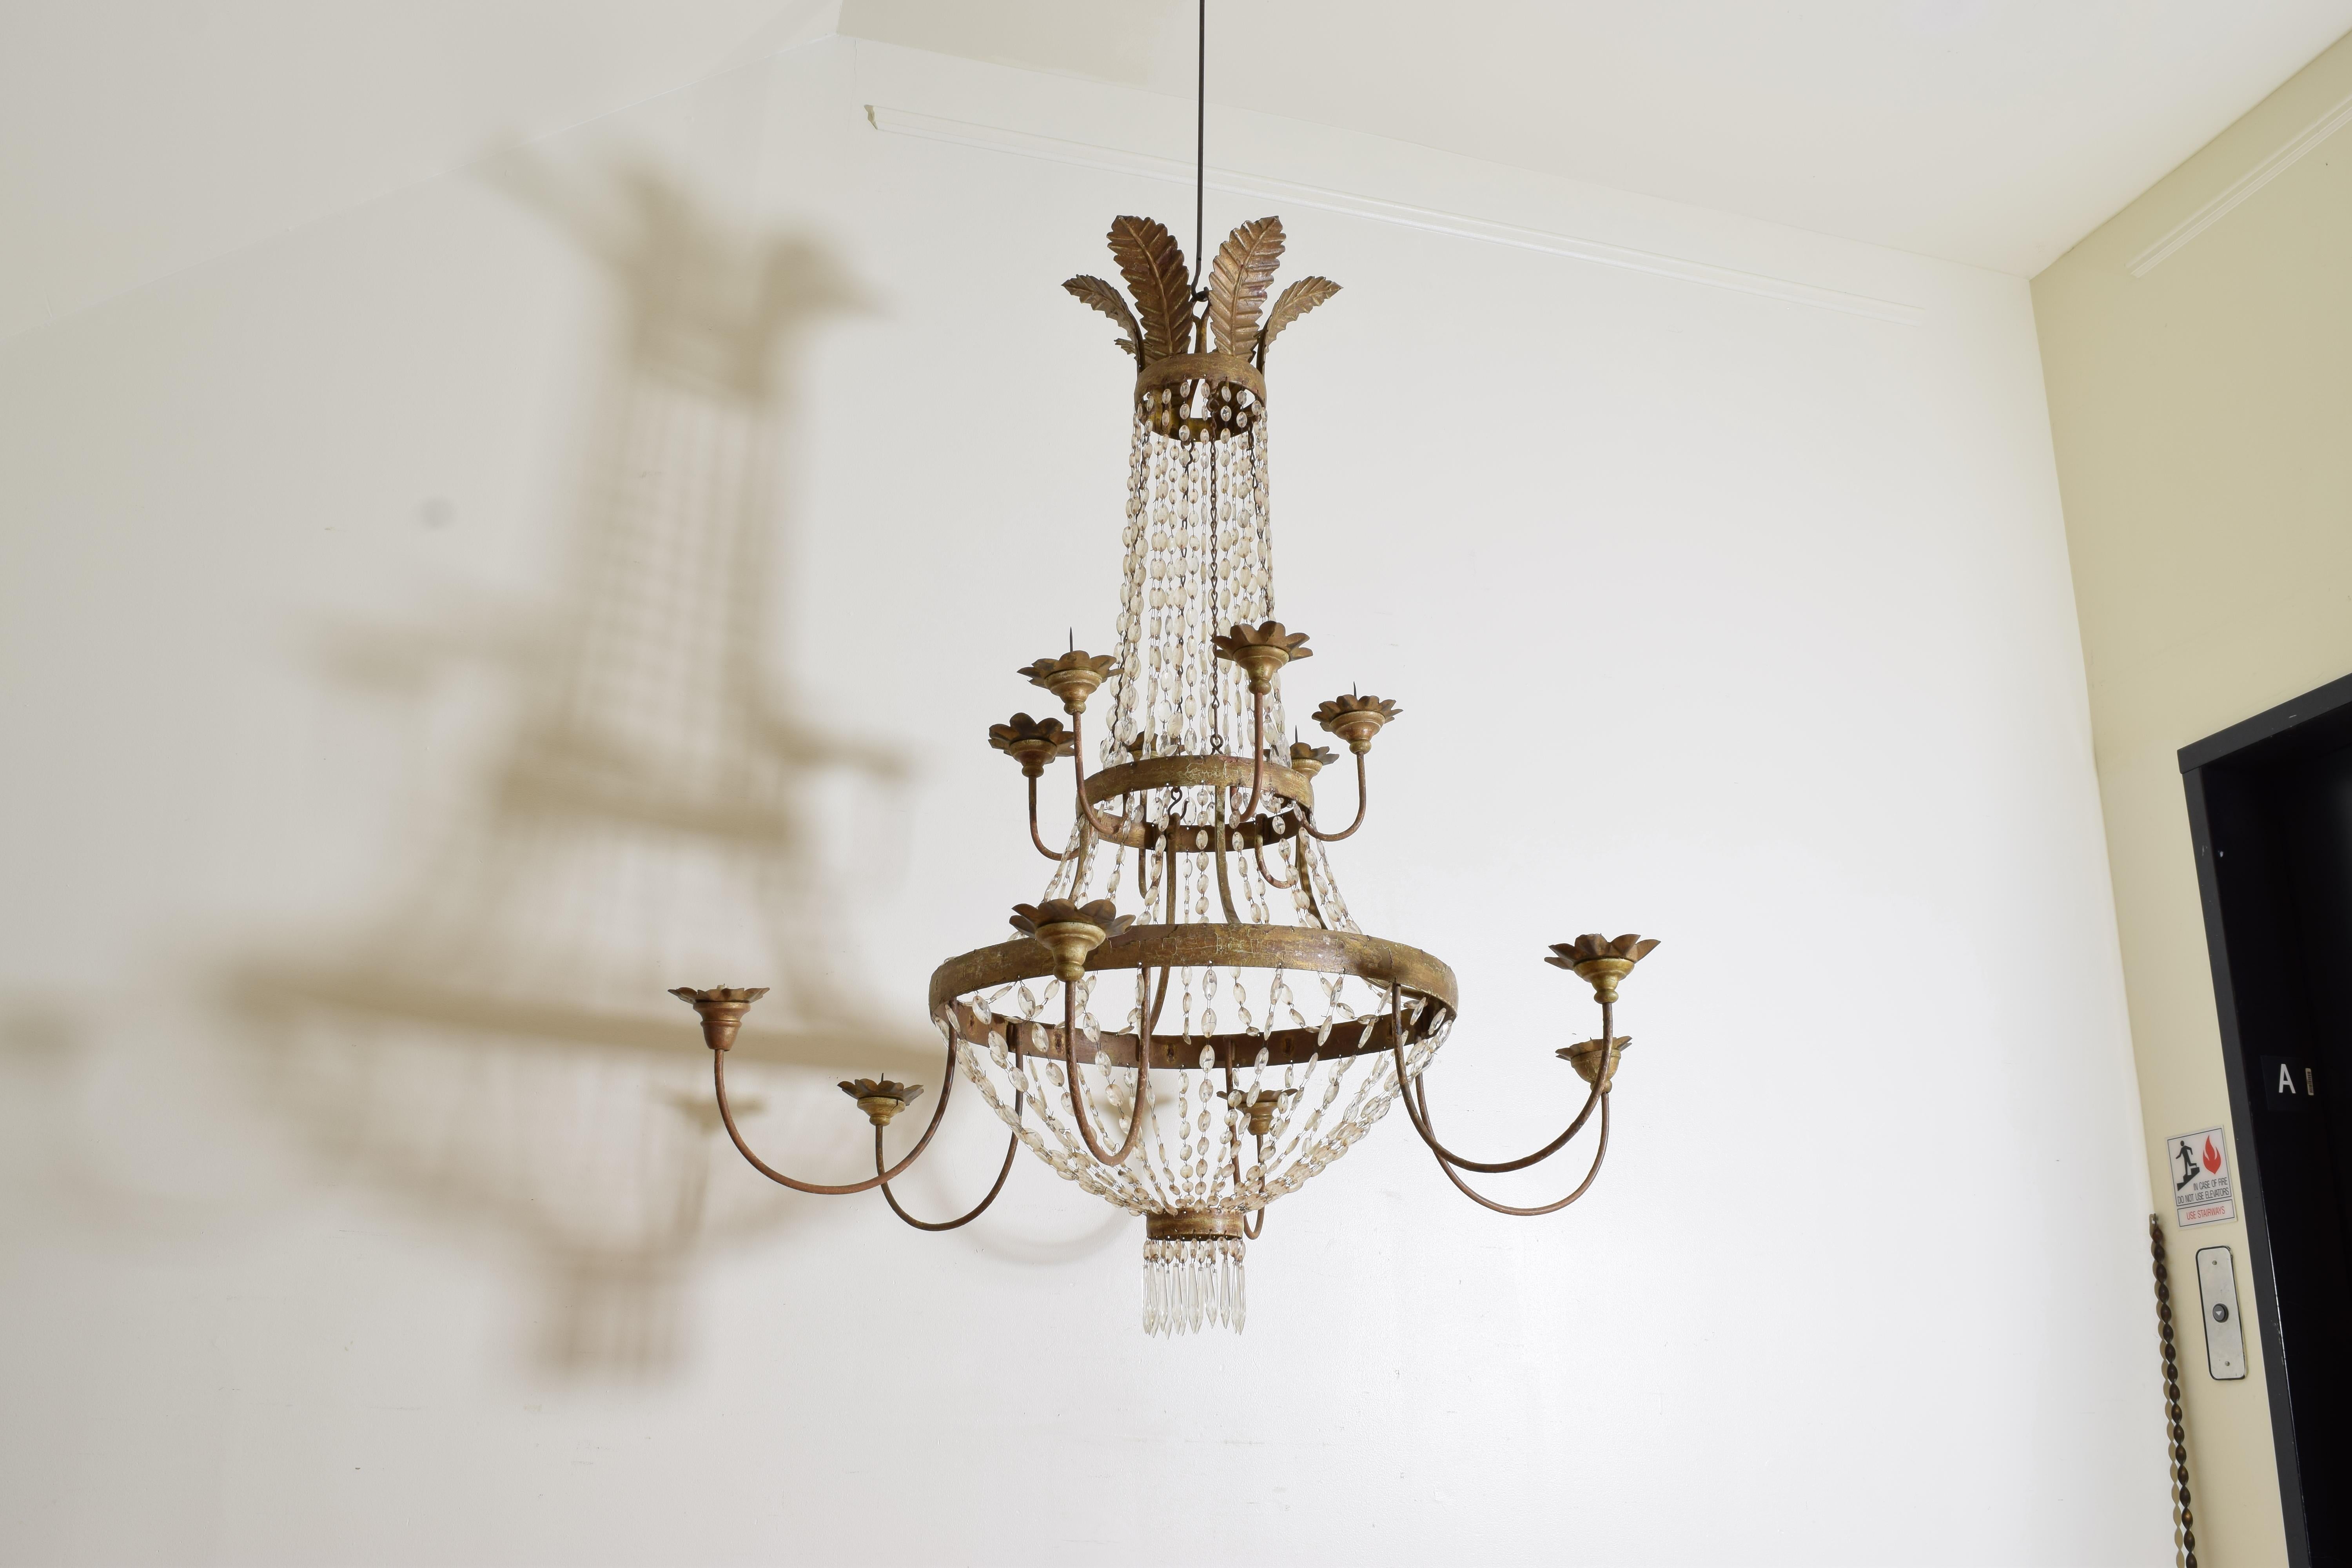 Early 19th Century Italian, Lucca, Empire Period Silver Gilt / Mecca 12-light Chandelier For Sale